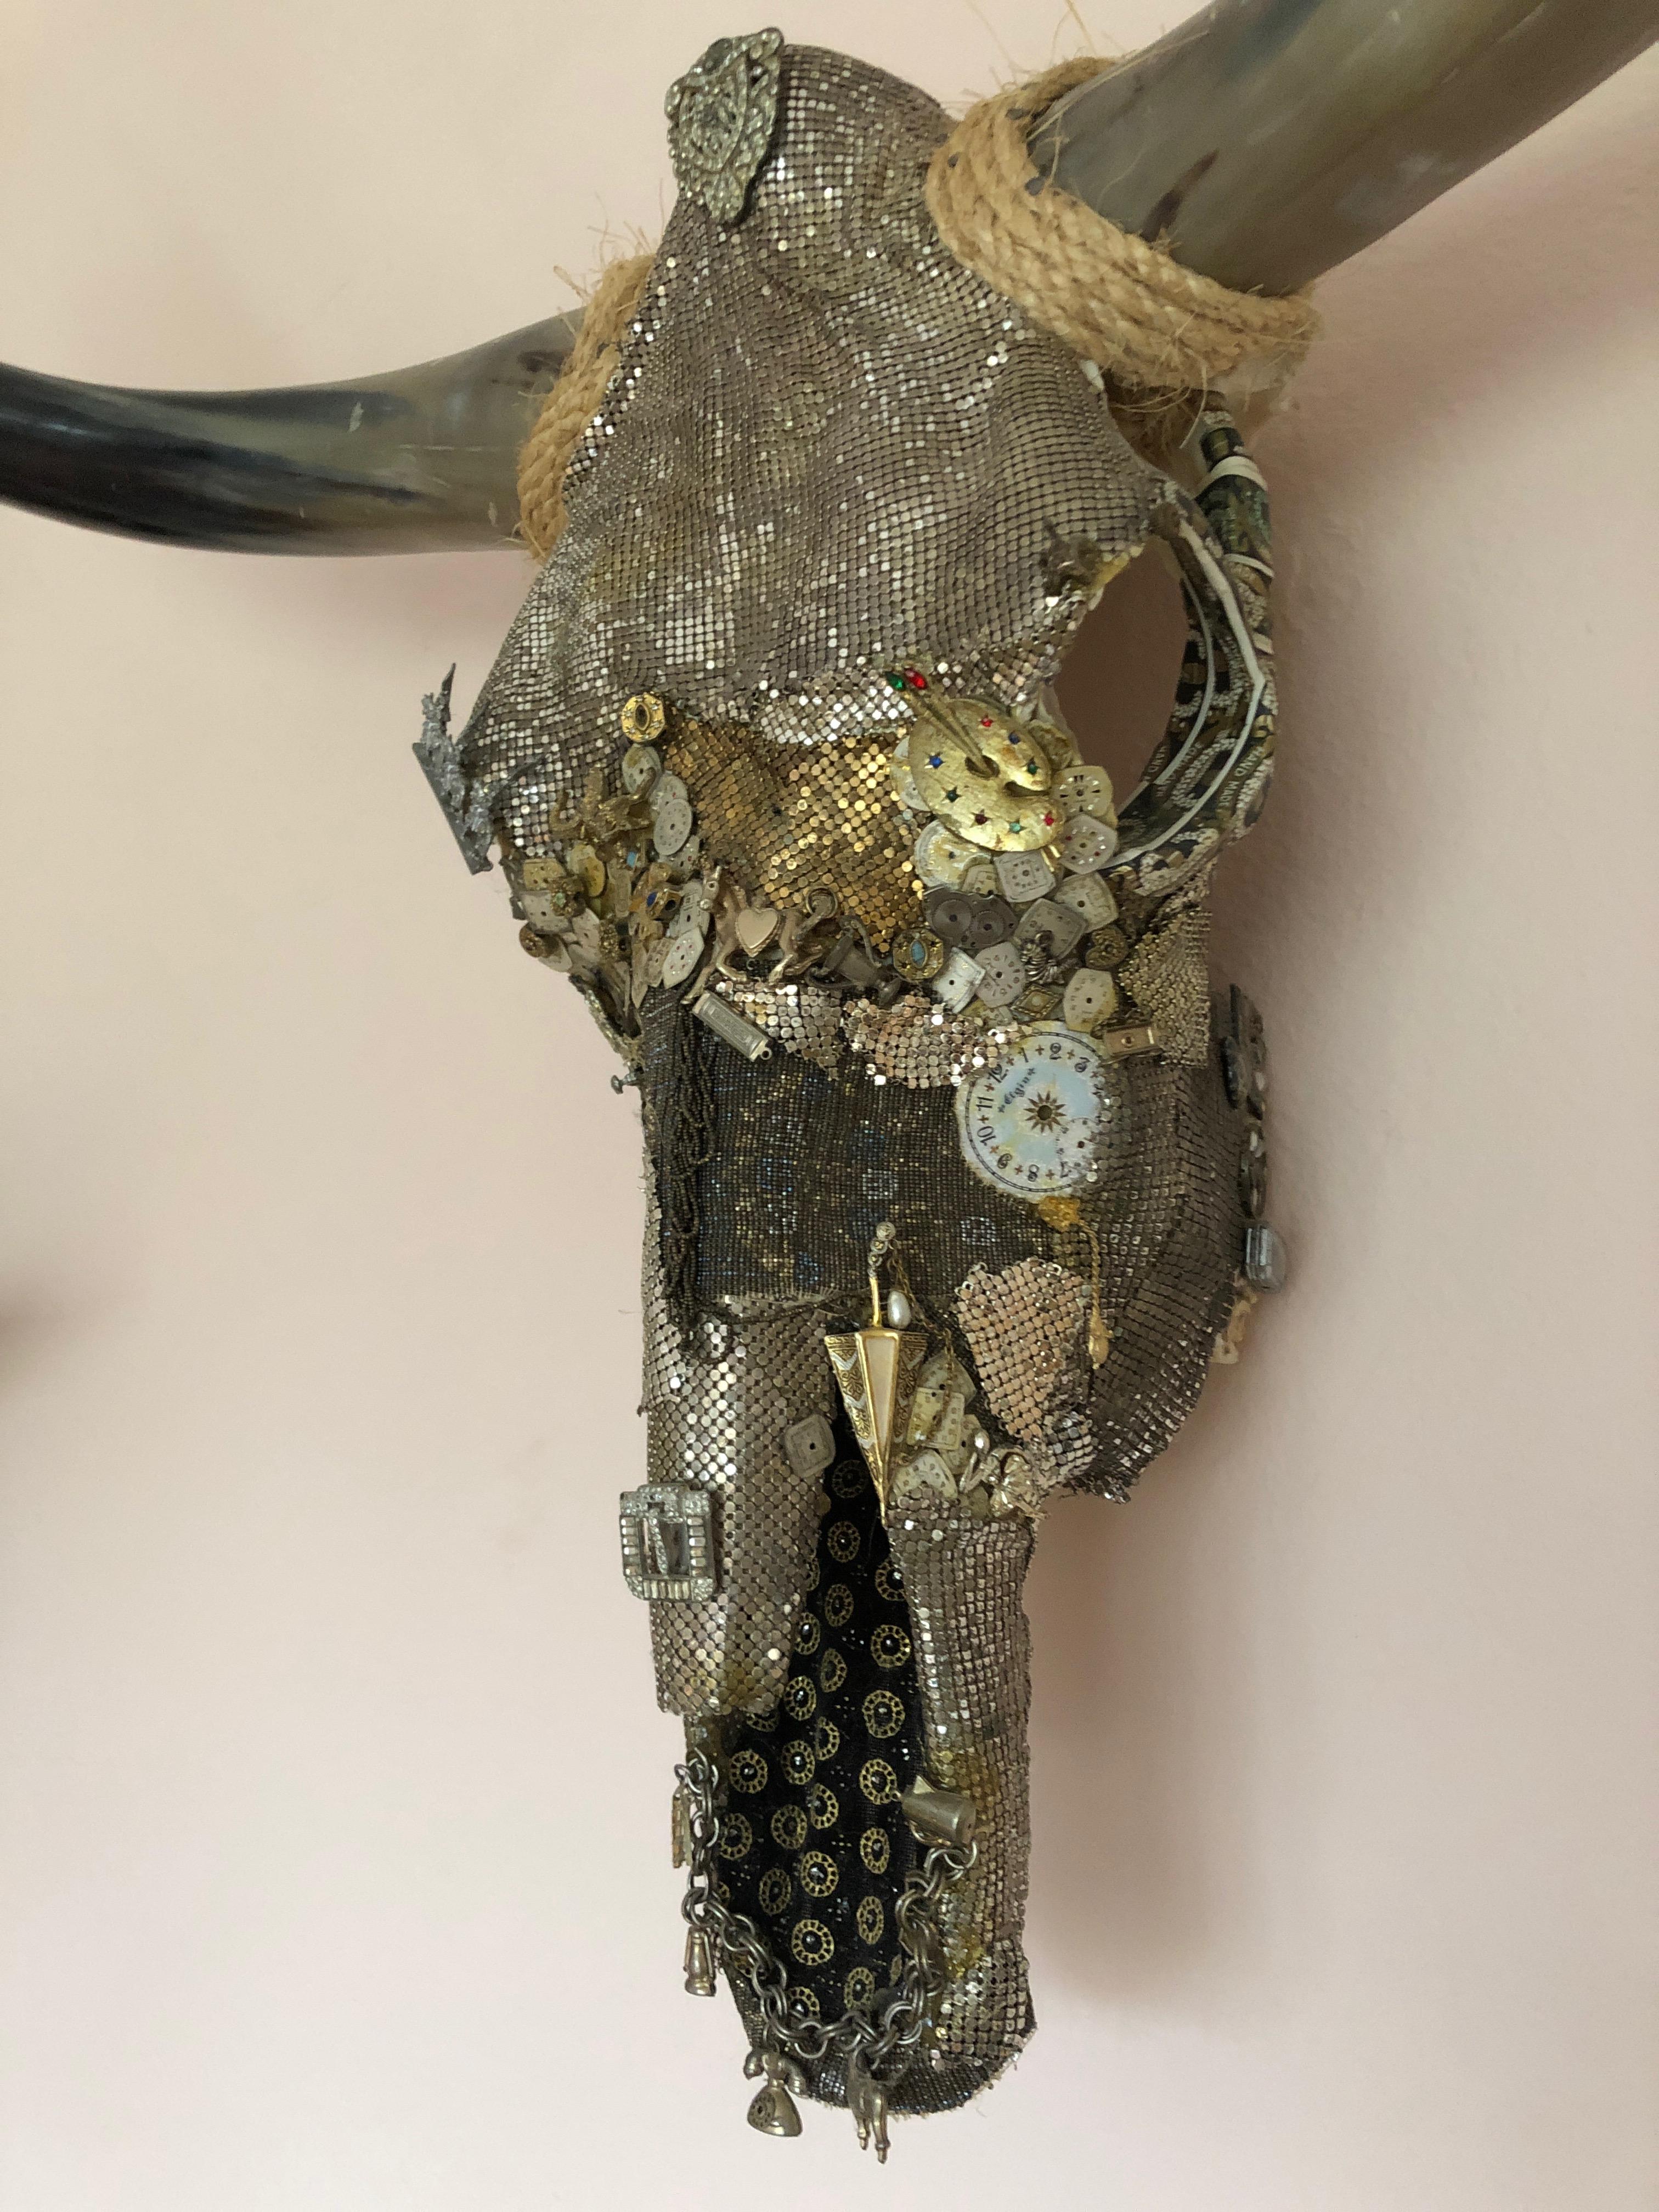 Fantastic mixed-media collage on a large longhorn skull that glitters with silver mesh from vintage handbags and is bejewelled with intricate layers of watch faces, charms, a rhinestone shoe buckle, in a masterful mix of silver, black and gold.
By